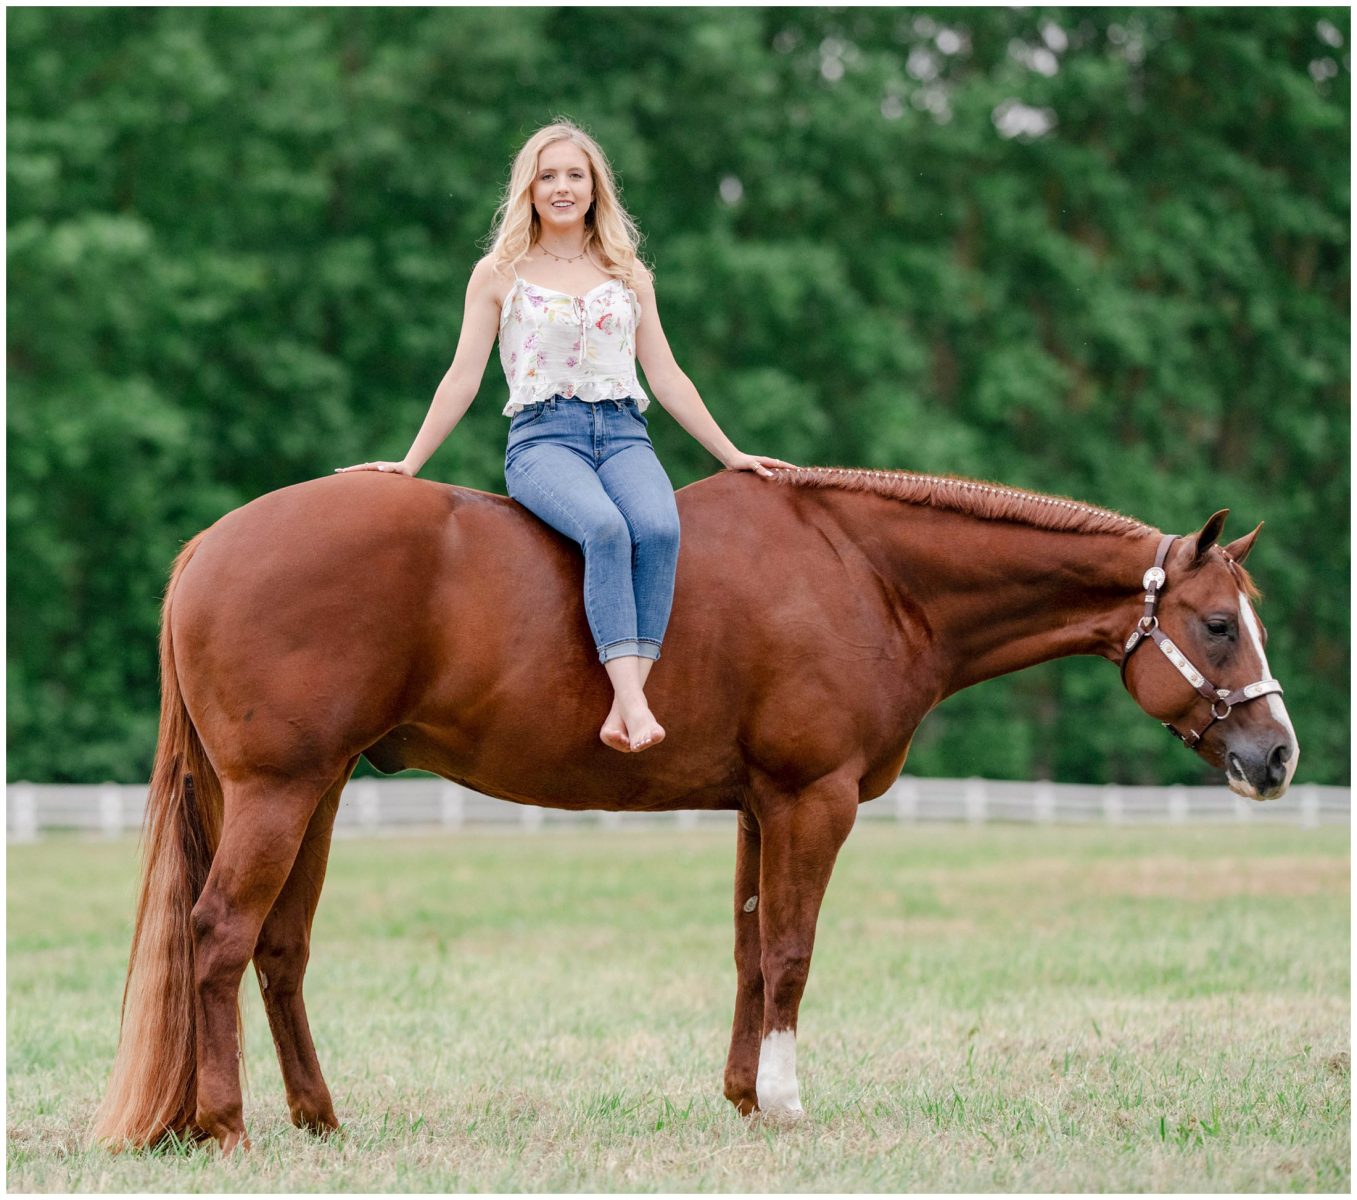 http://kirstiemarie.com/wp-content/uploads/2019/09/Jacqueline-Potwora-AQHYA-champion-The-Absolute-Best-McCulloch-Training-Stable-Equestrian-Kirstie-Marie-Photography_0010-1.jpg